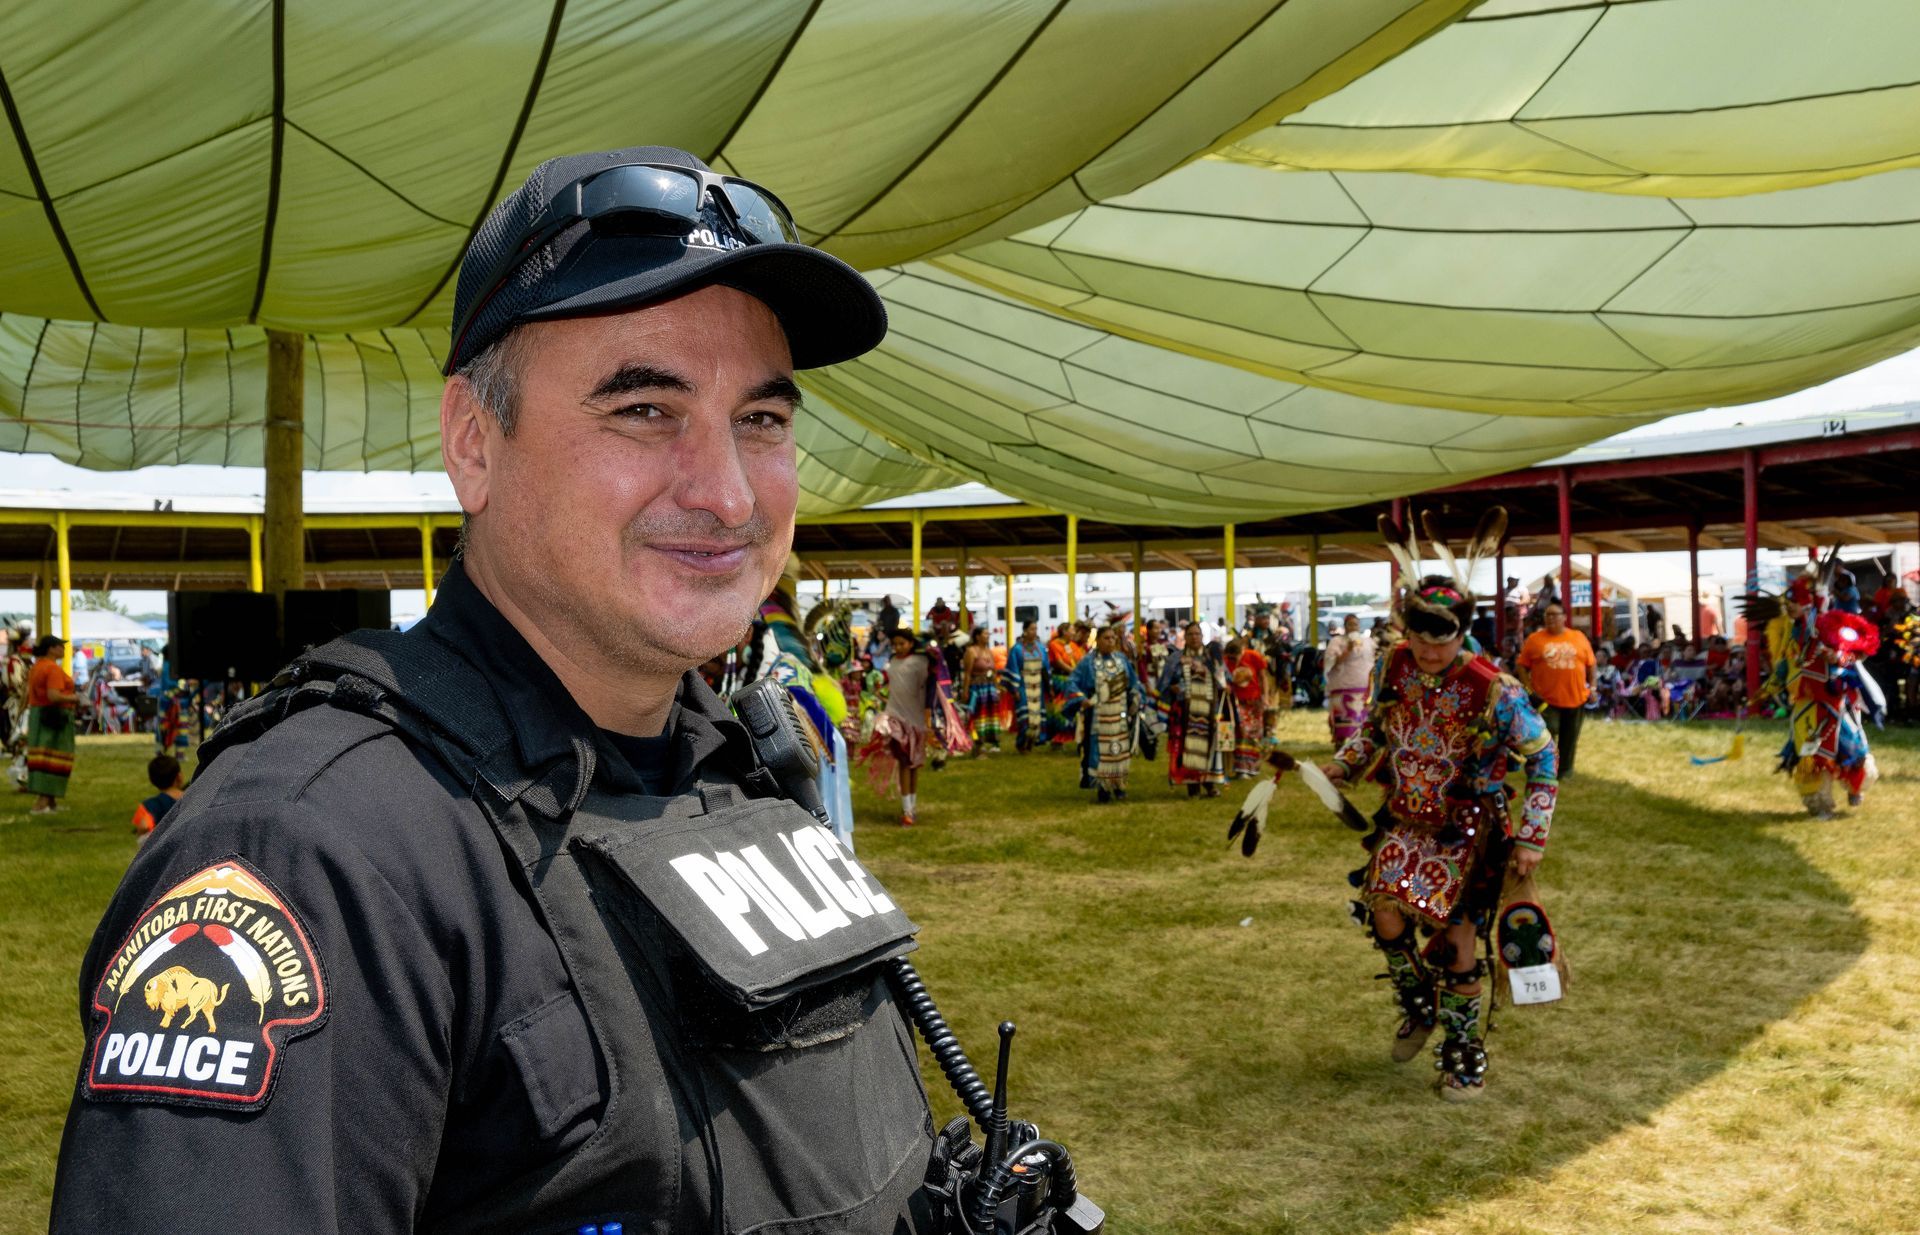 MFNPS-Manitoba First Nations Police Service Experienced Officers